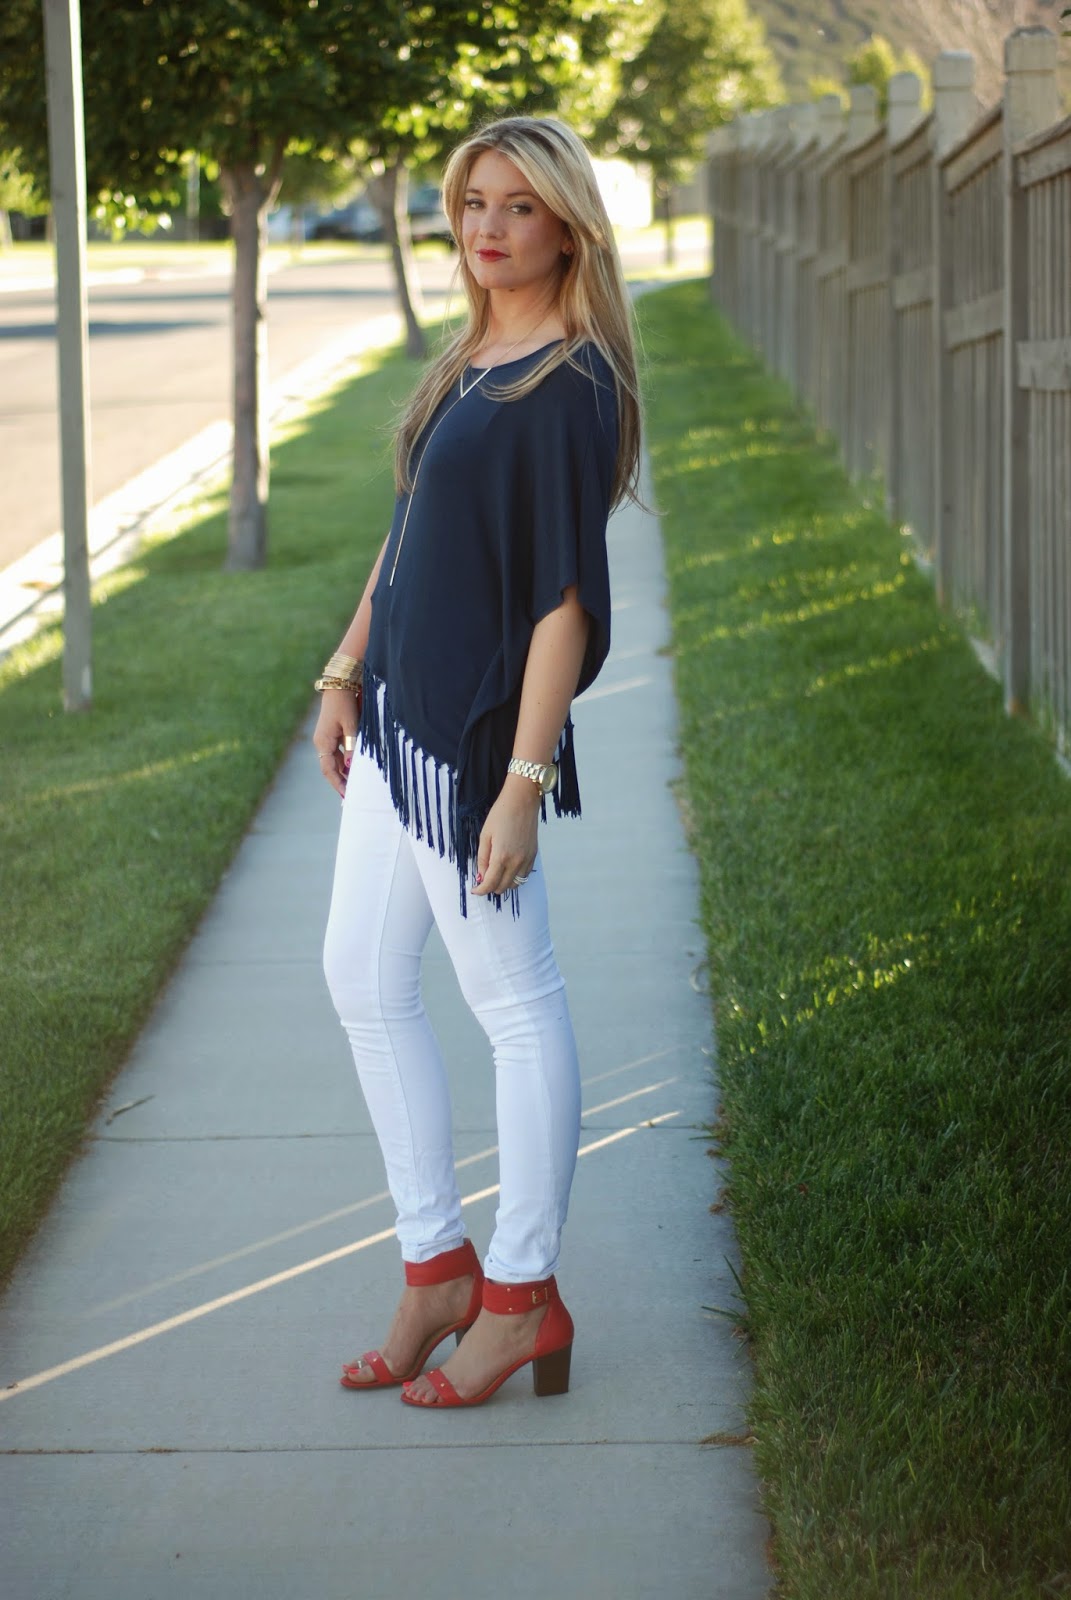 RED, WHITE & BLUE WHAT SHE WEARS LINK UP | The Red Closet Diary